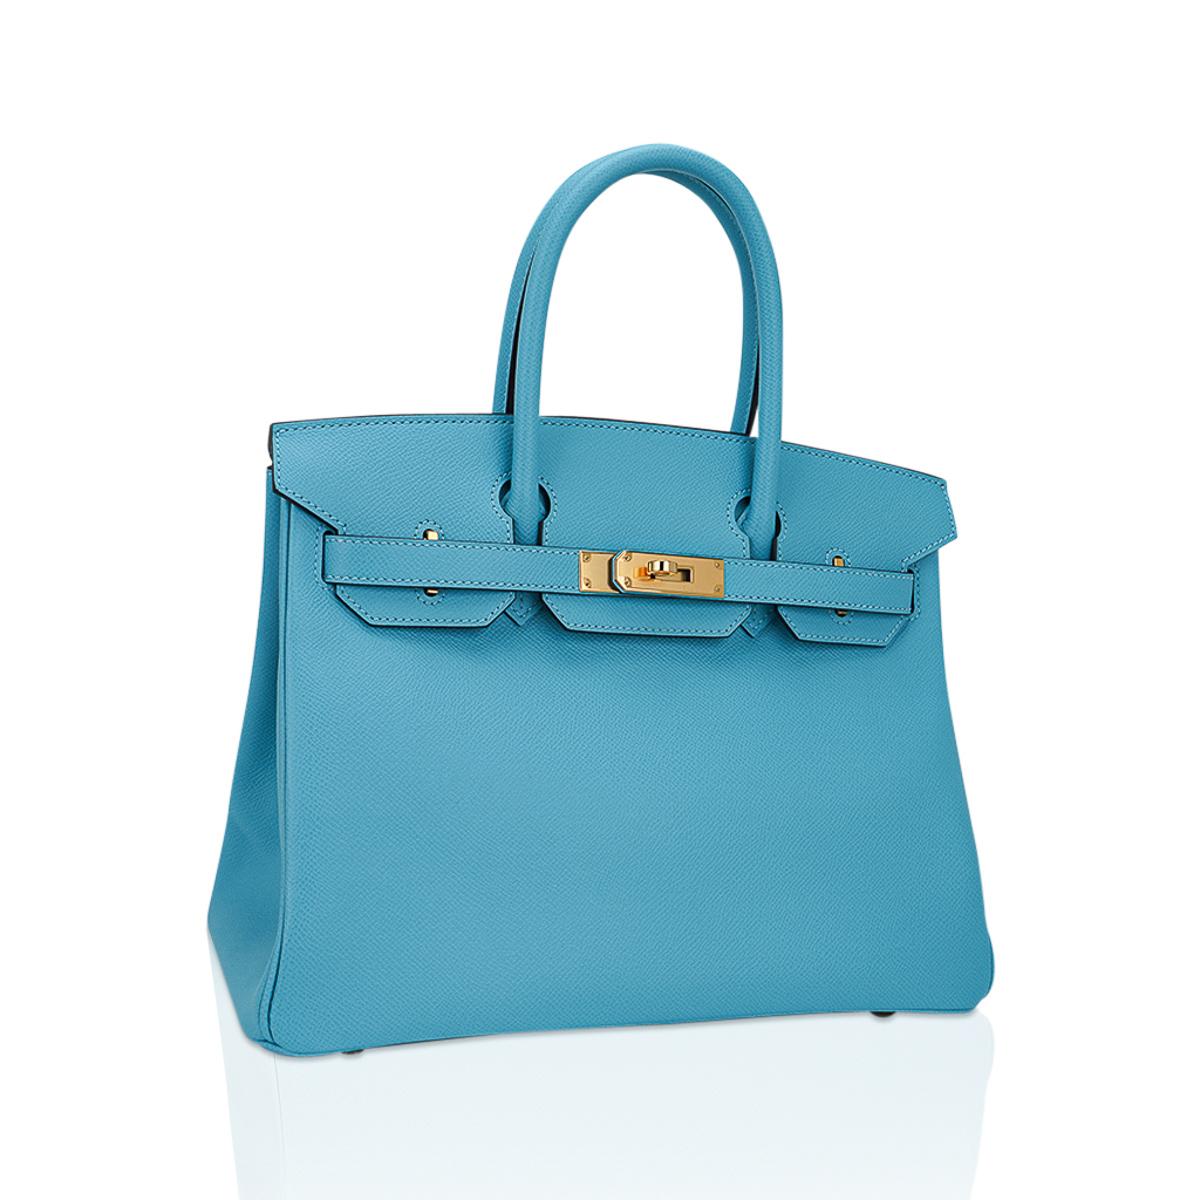 Mightychic offers an Hermes Birkin 30 bag featured in  Bleu du Nord.
This beautiful sky blue is complimented with gold hardware.
Accentuated in Epsom leather.
Comes with the lock and keys in the clochette, sleepers, raincoat and signature Hermes